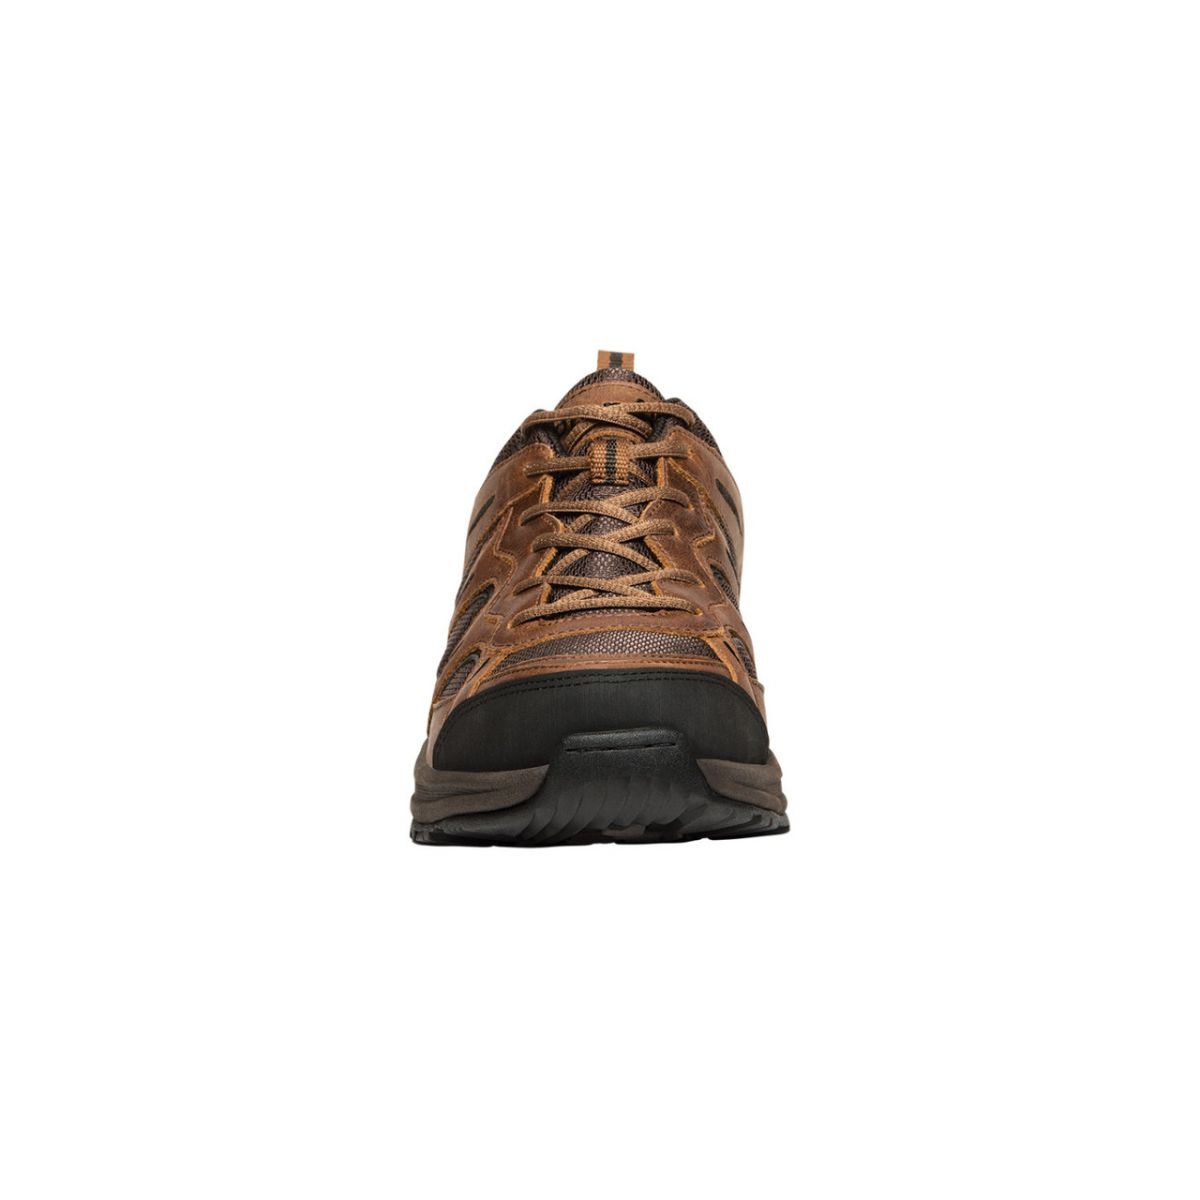 Propet Men's Connelly Hiking Shoe Brown - M5503BR BROWN - BROWN, 14-3E